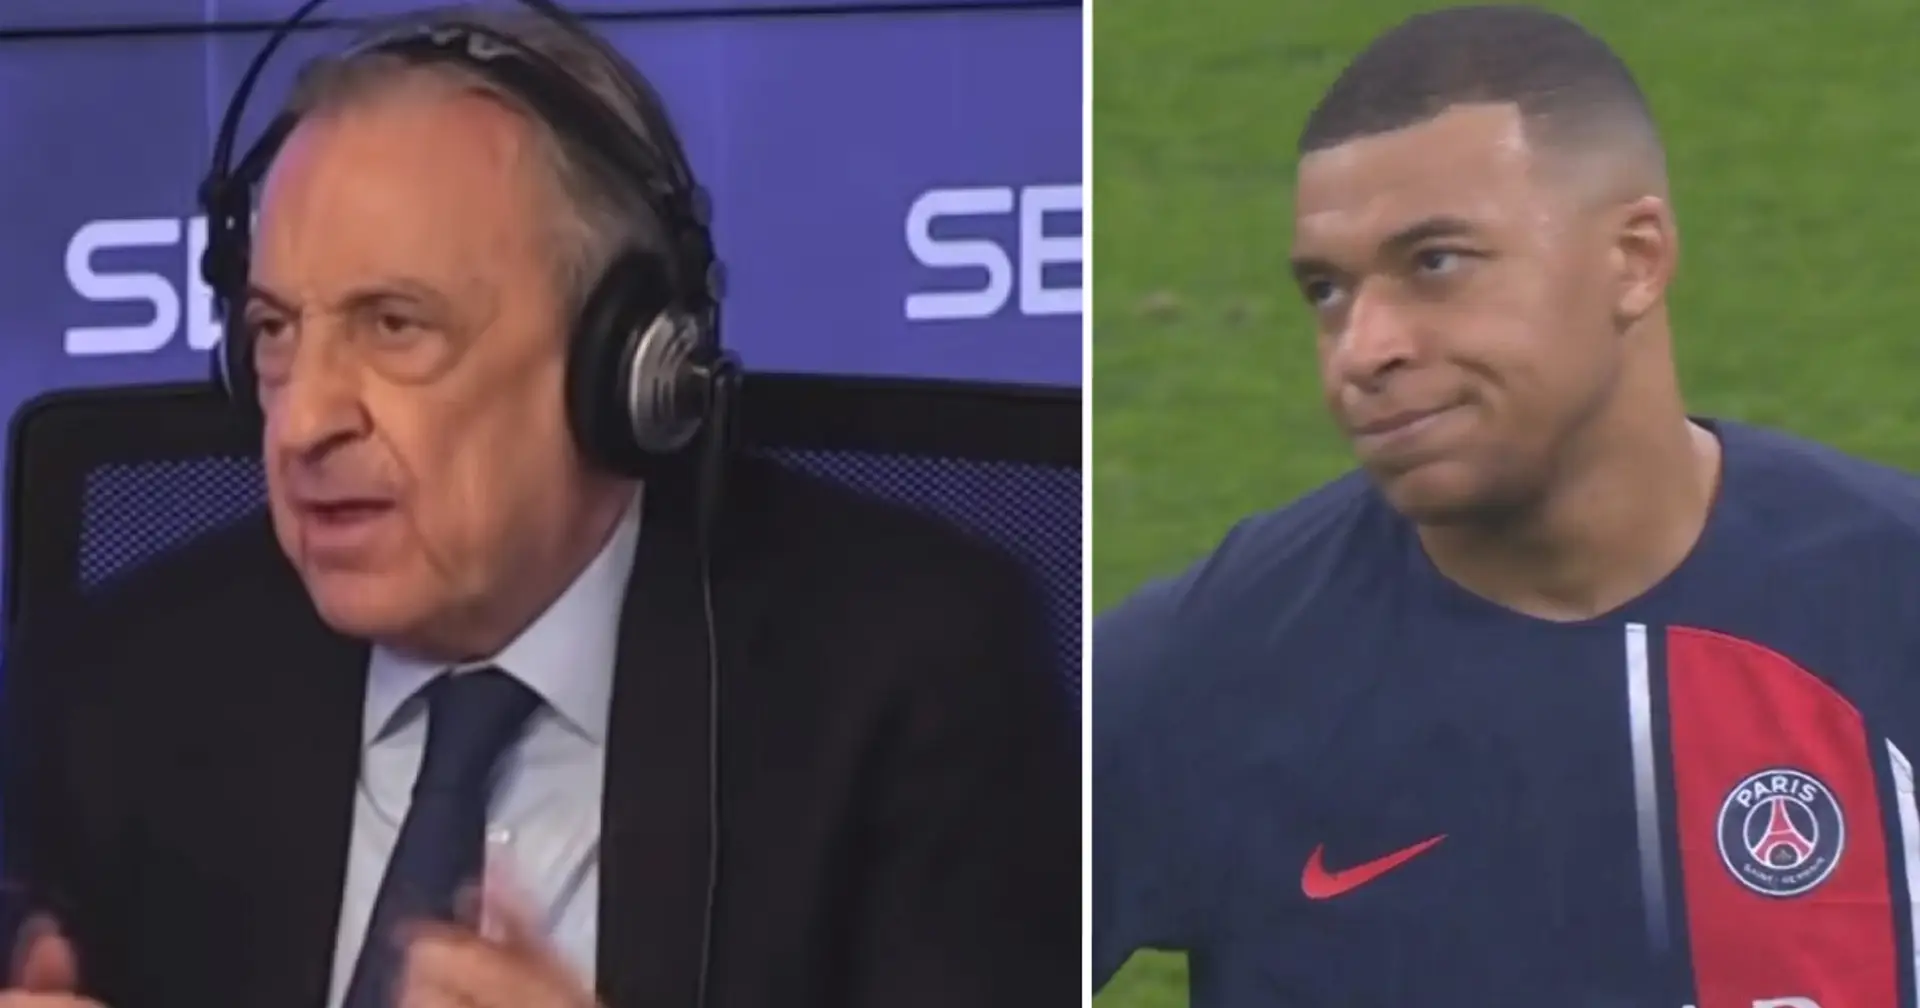 Real Madrid's gesture to Kylian Mbappe amidst turbulent times at PSG revealed